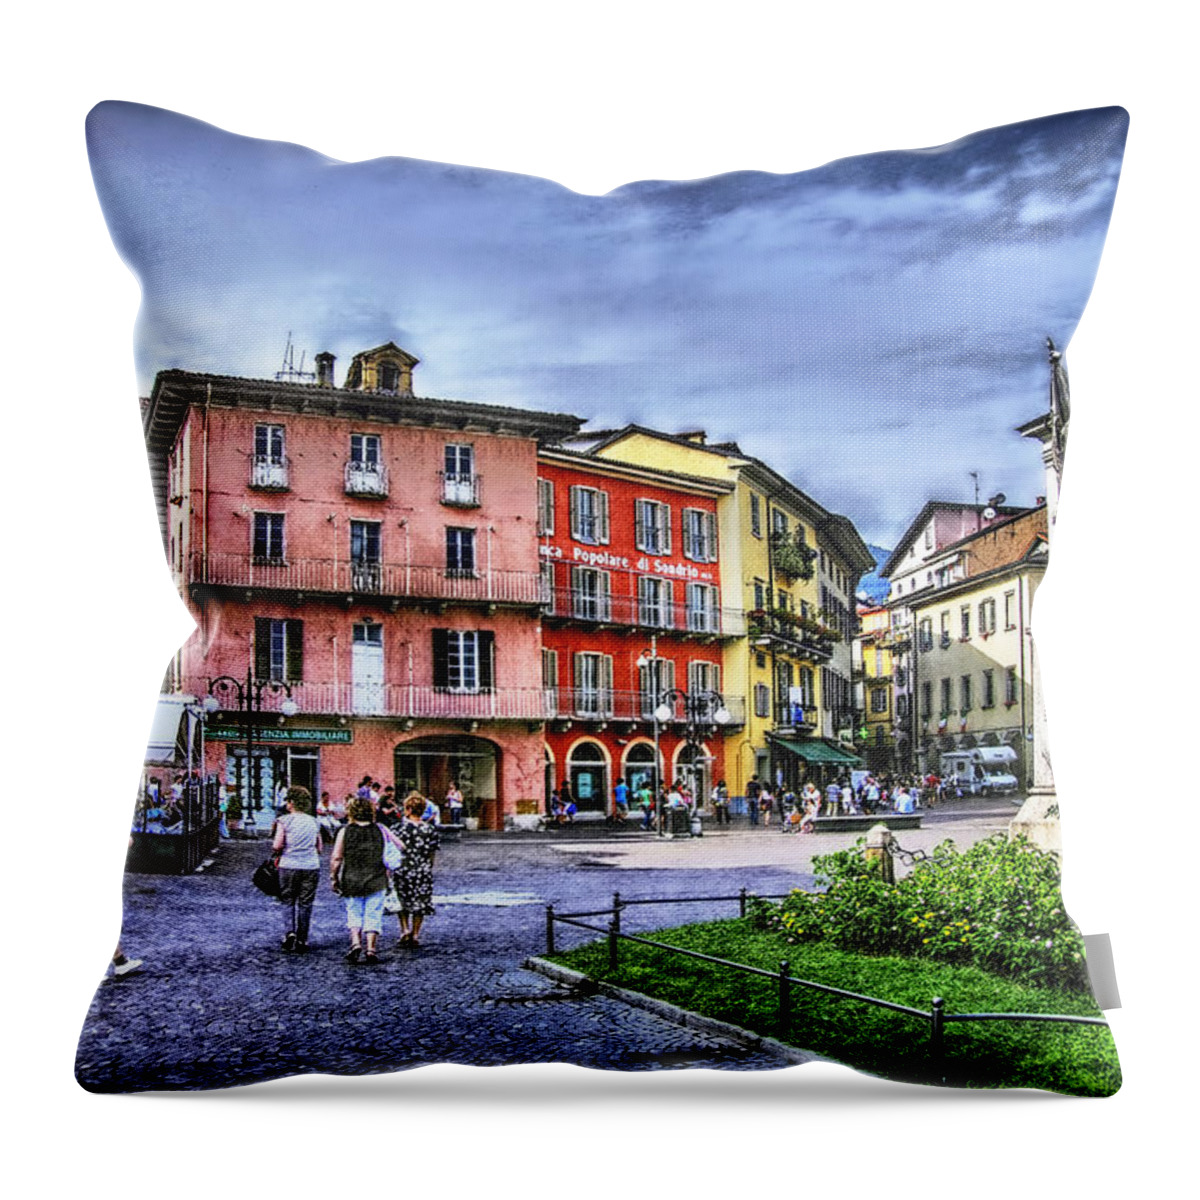 Italy Throw Pillow featuring the photograph Italian Small Town by Hanny Heim